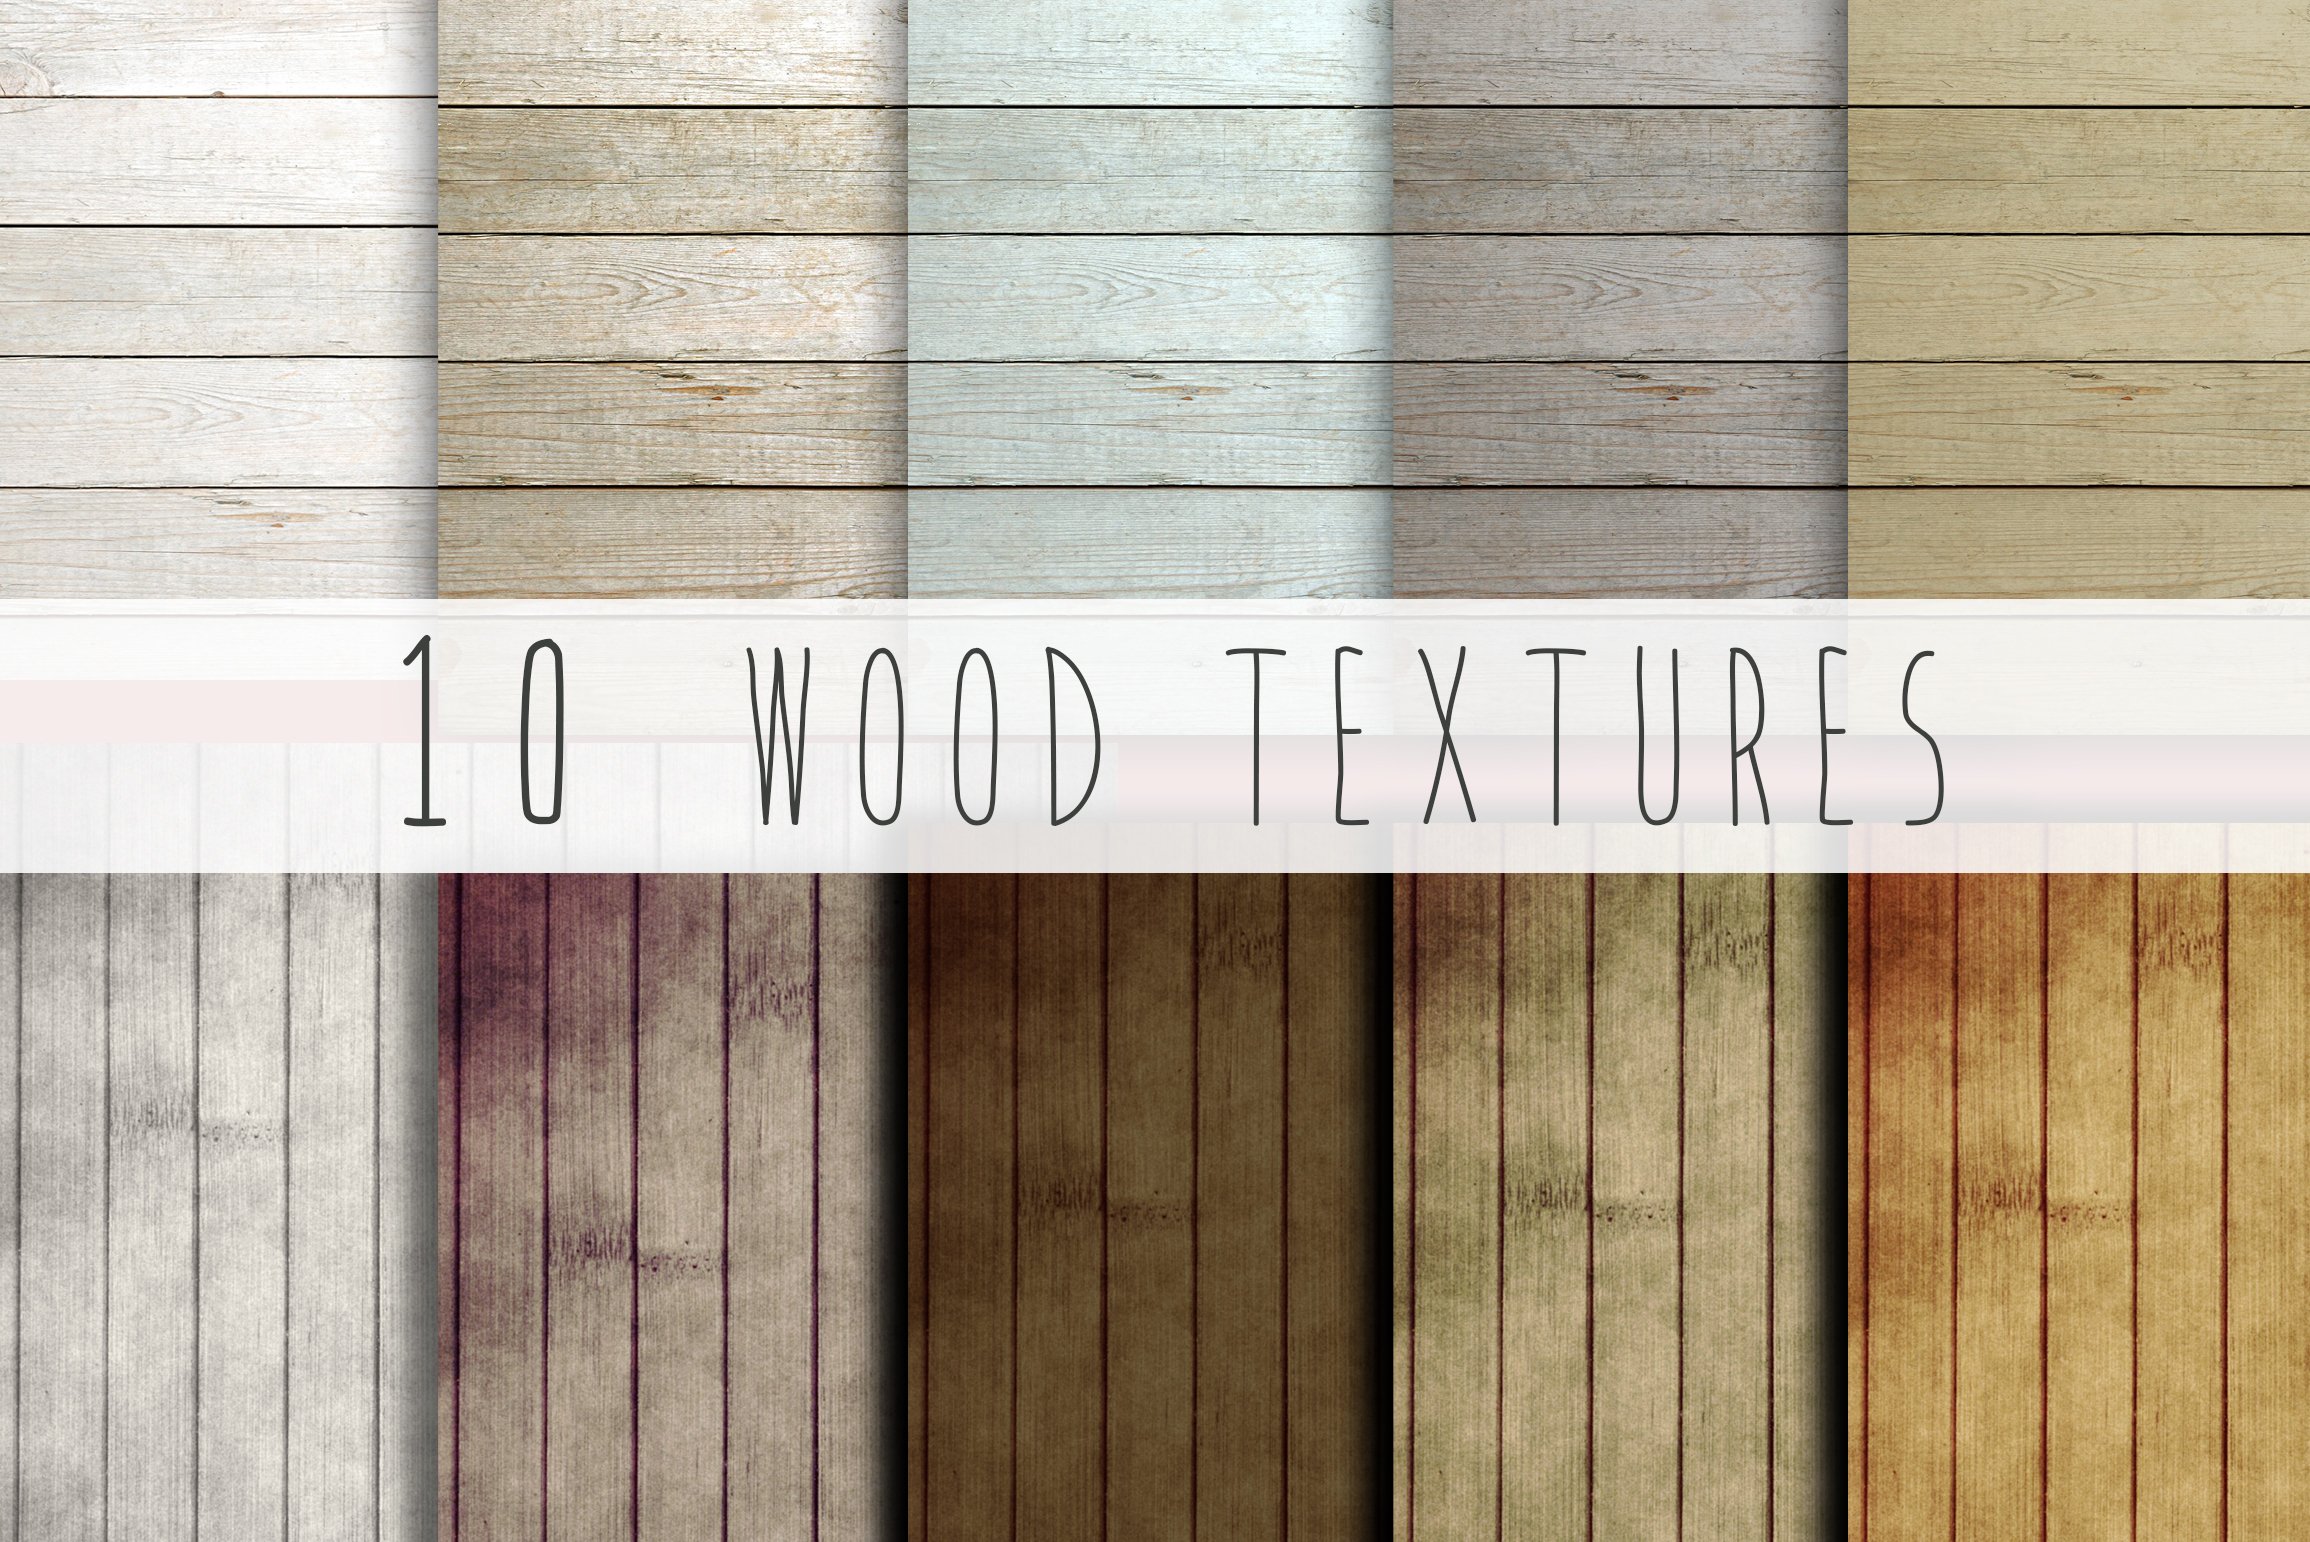 Big cool wooden textures in a natural style.